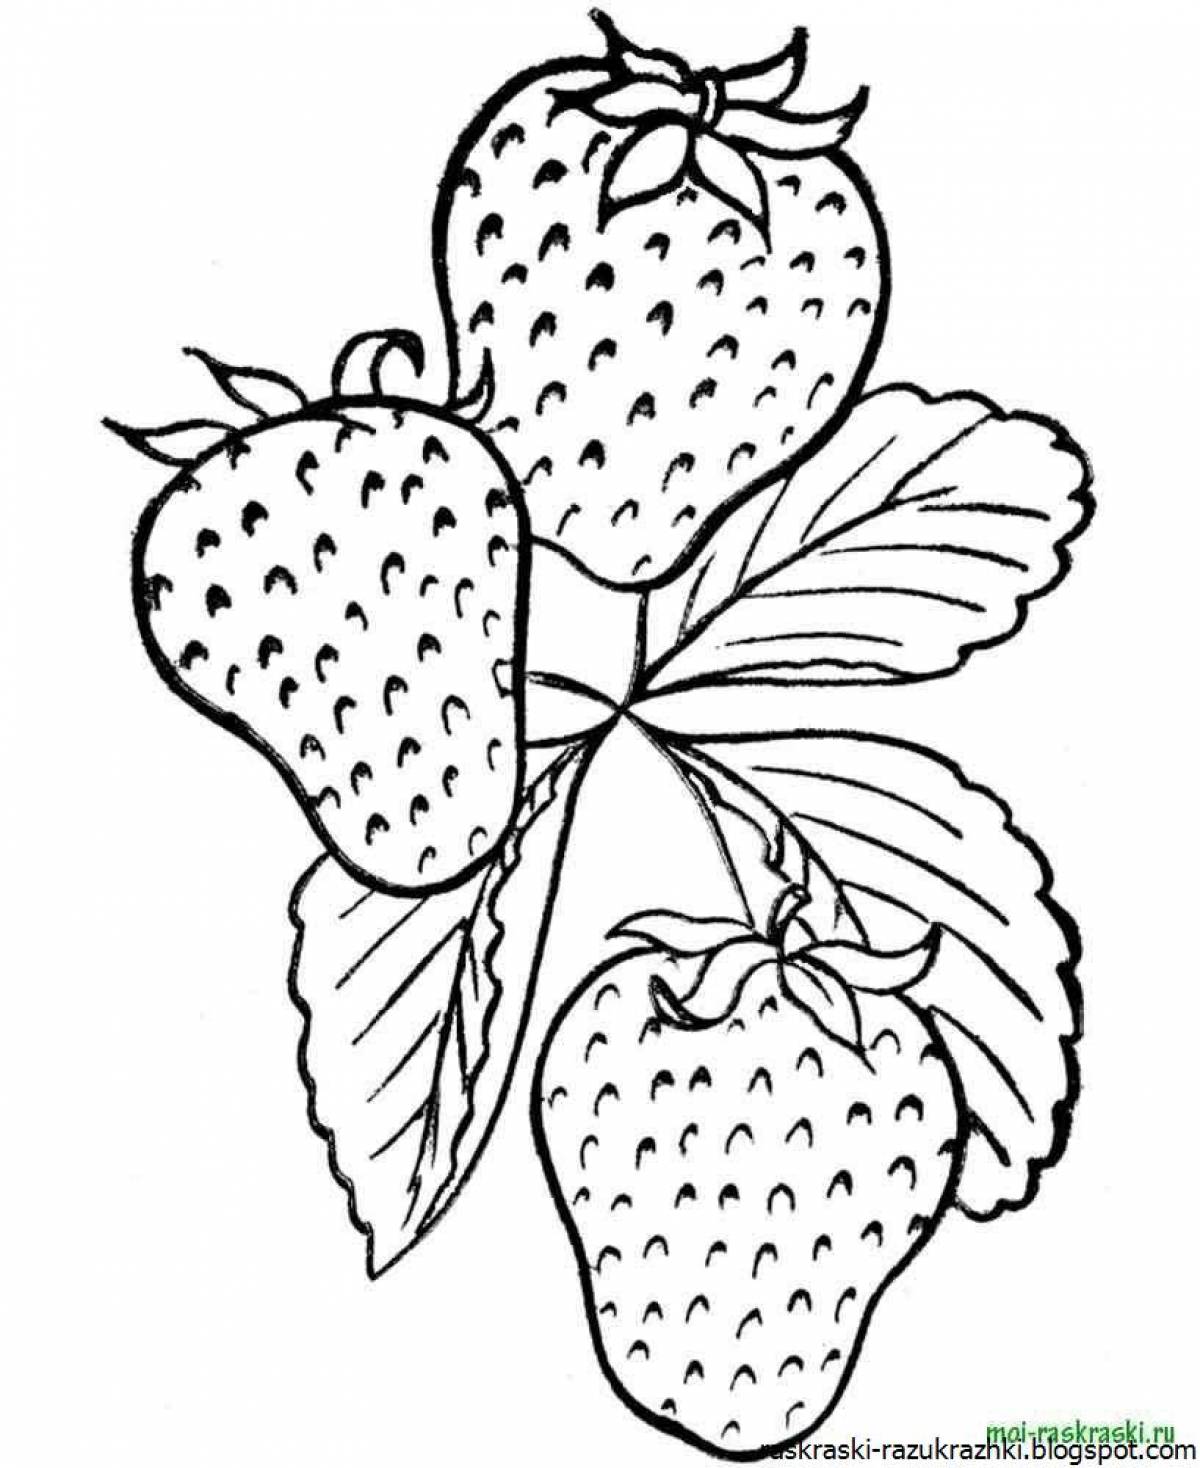 Coloring book shining strawberry for kids